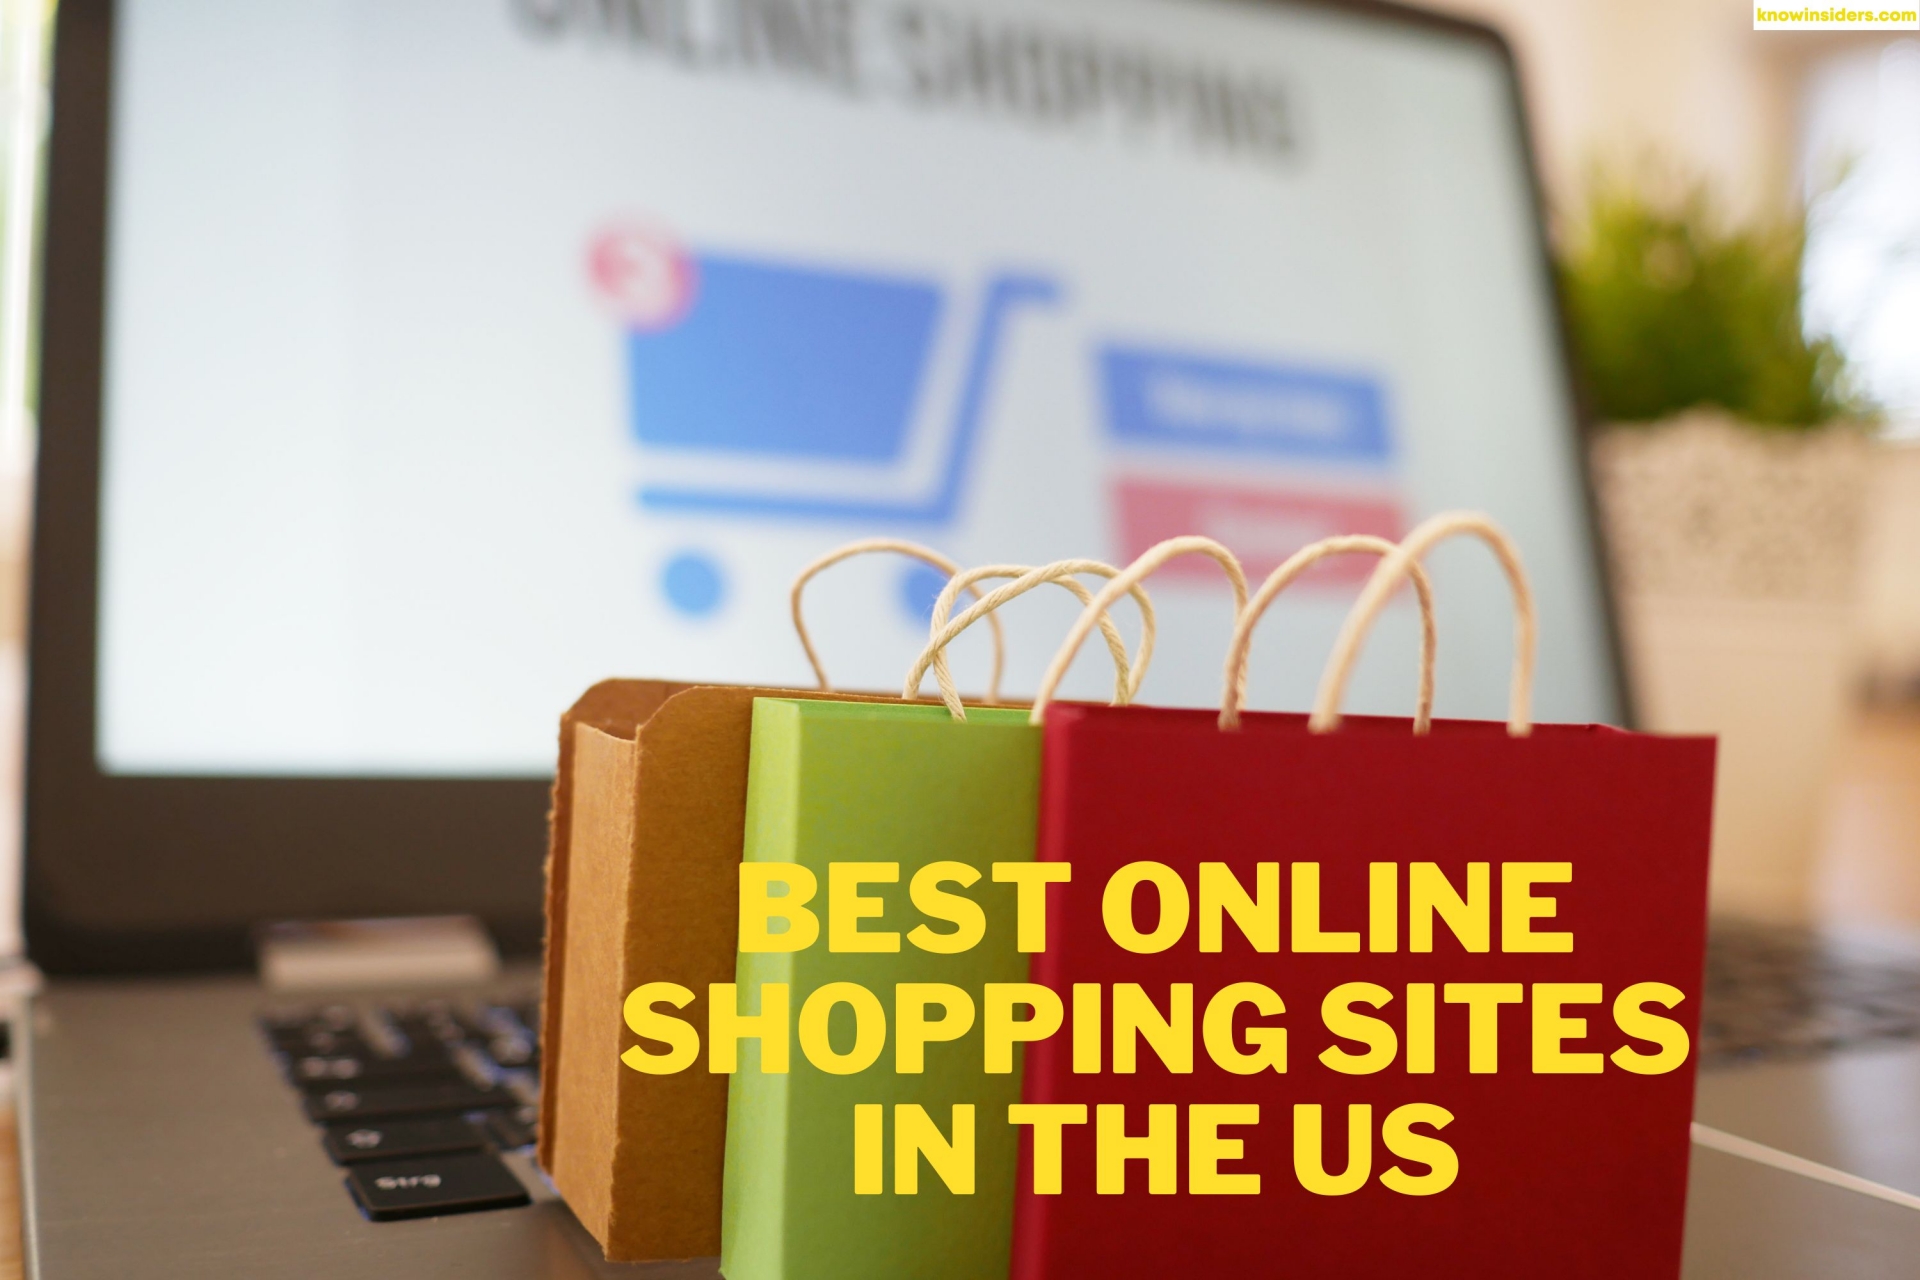 Top 20 Best Online Shopping Sites To Buy Cheapest Clothes In The US Today